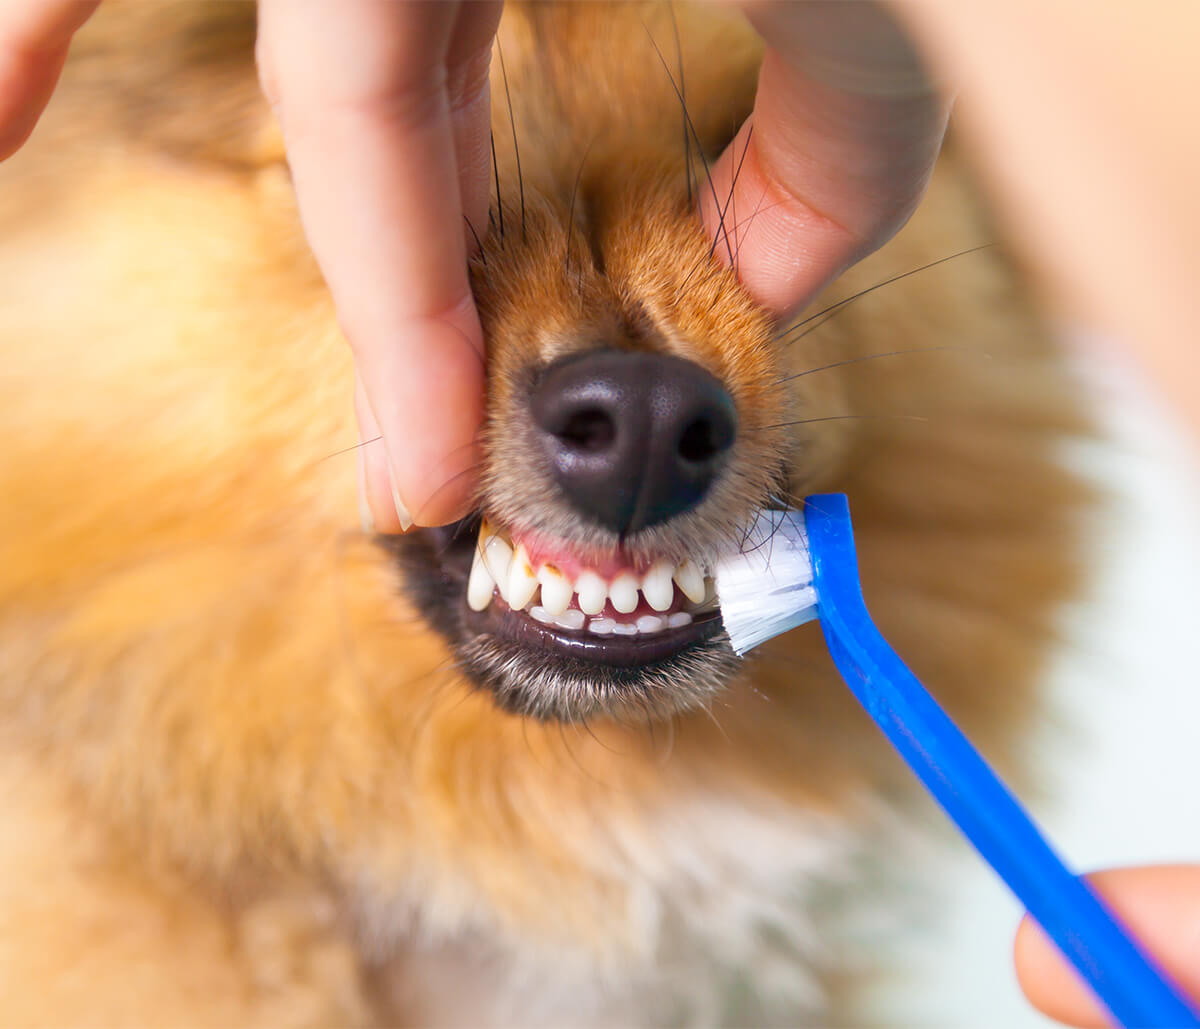 A healthy mouth is a happy, healthy dog! The importance of dental care, early and often